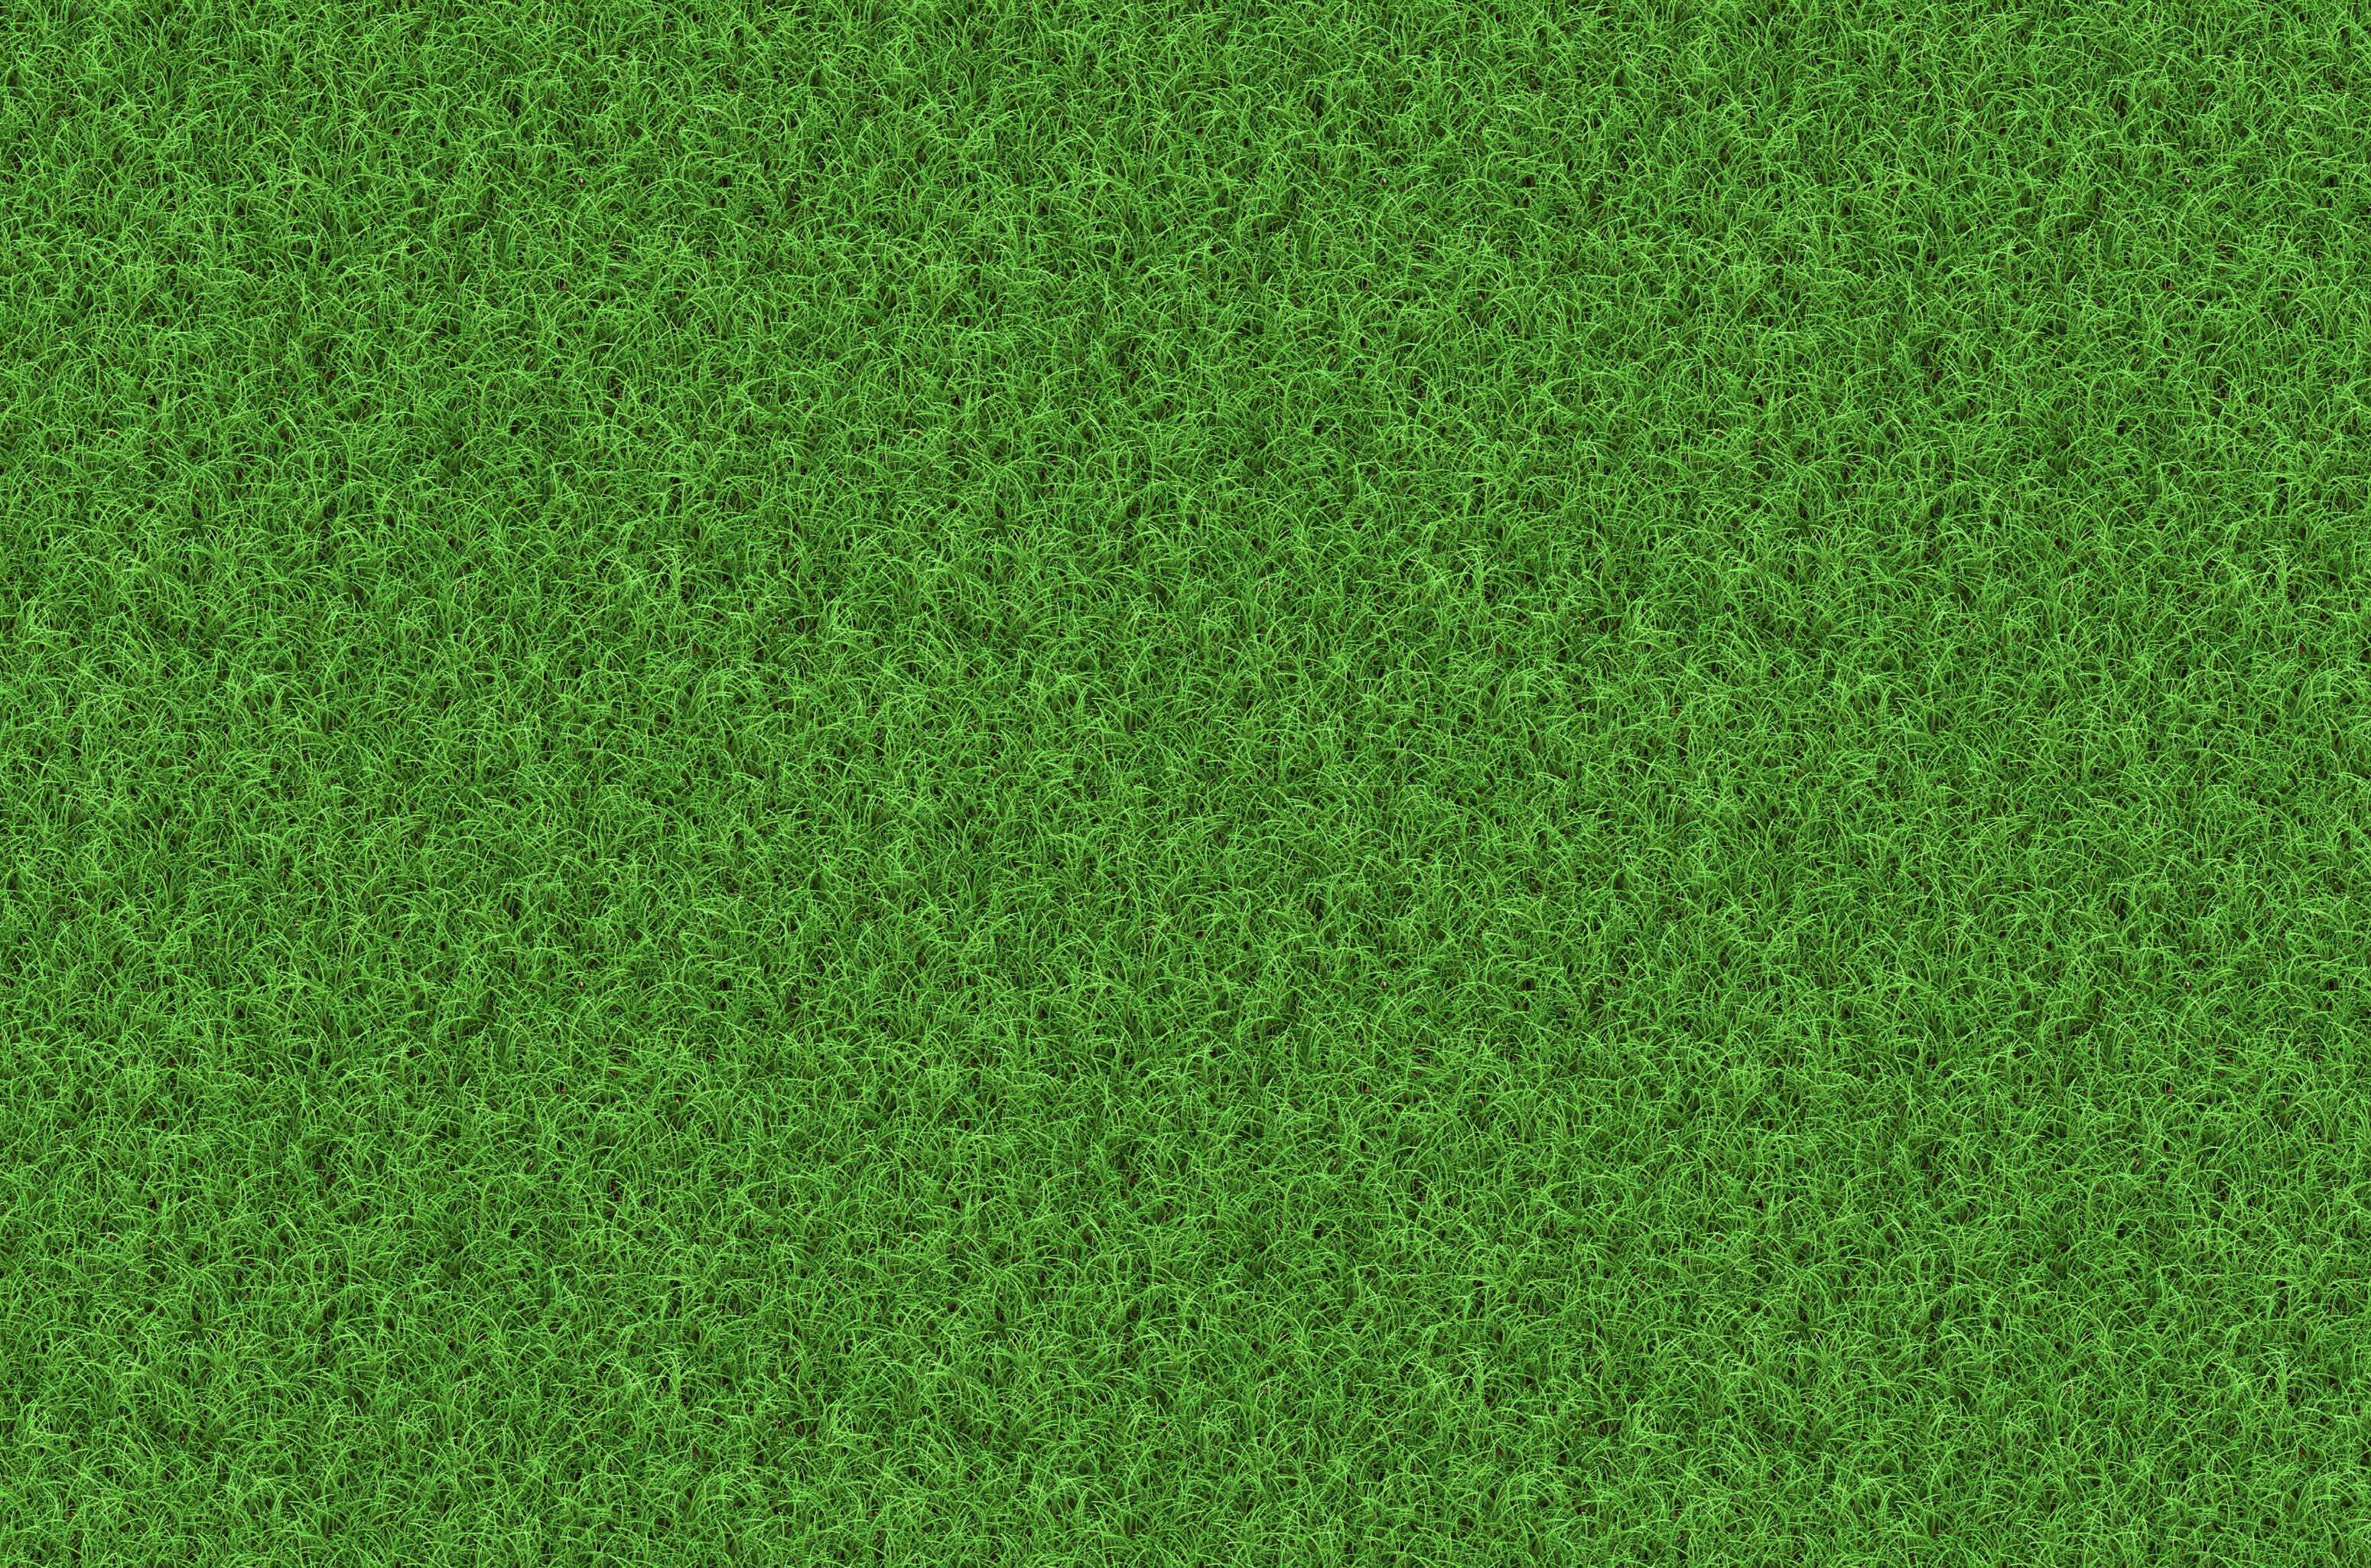 Seven Free Grass Textures or Lawn Background Images | www